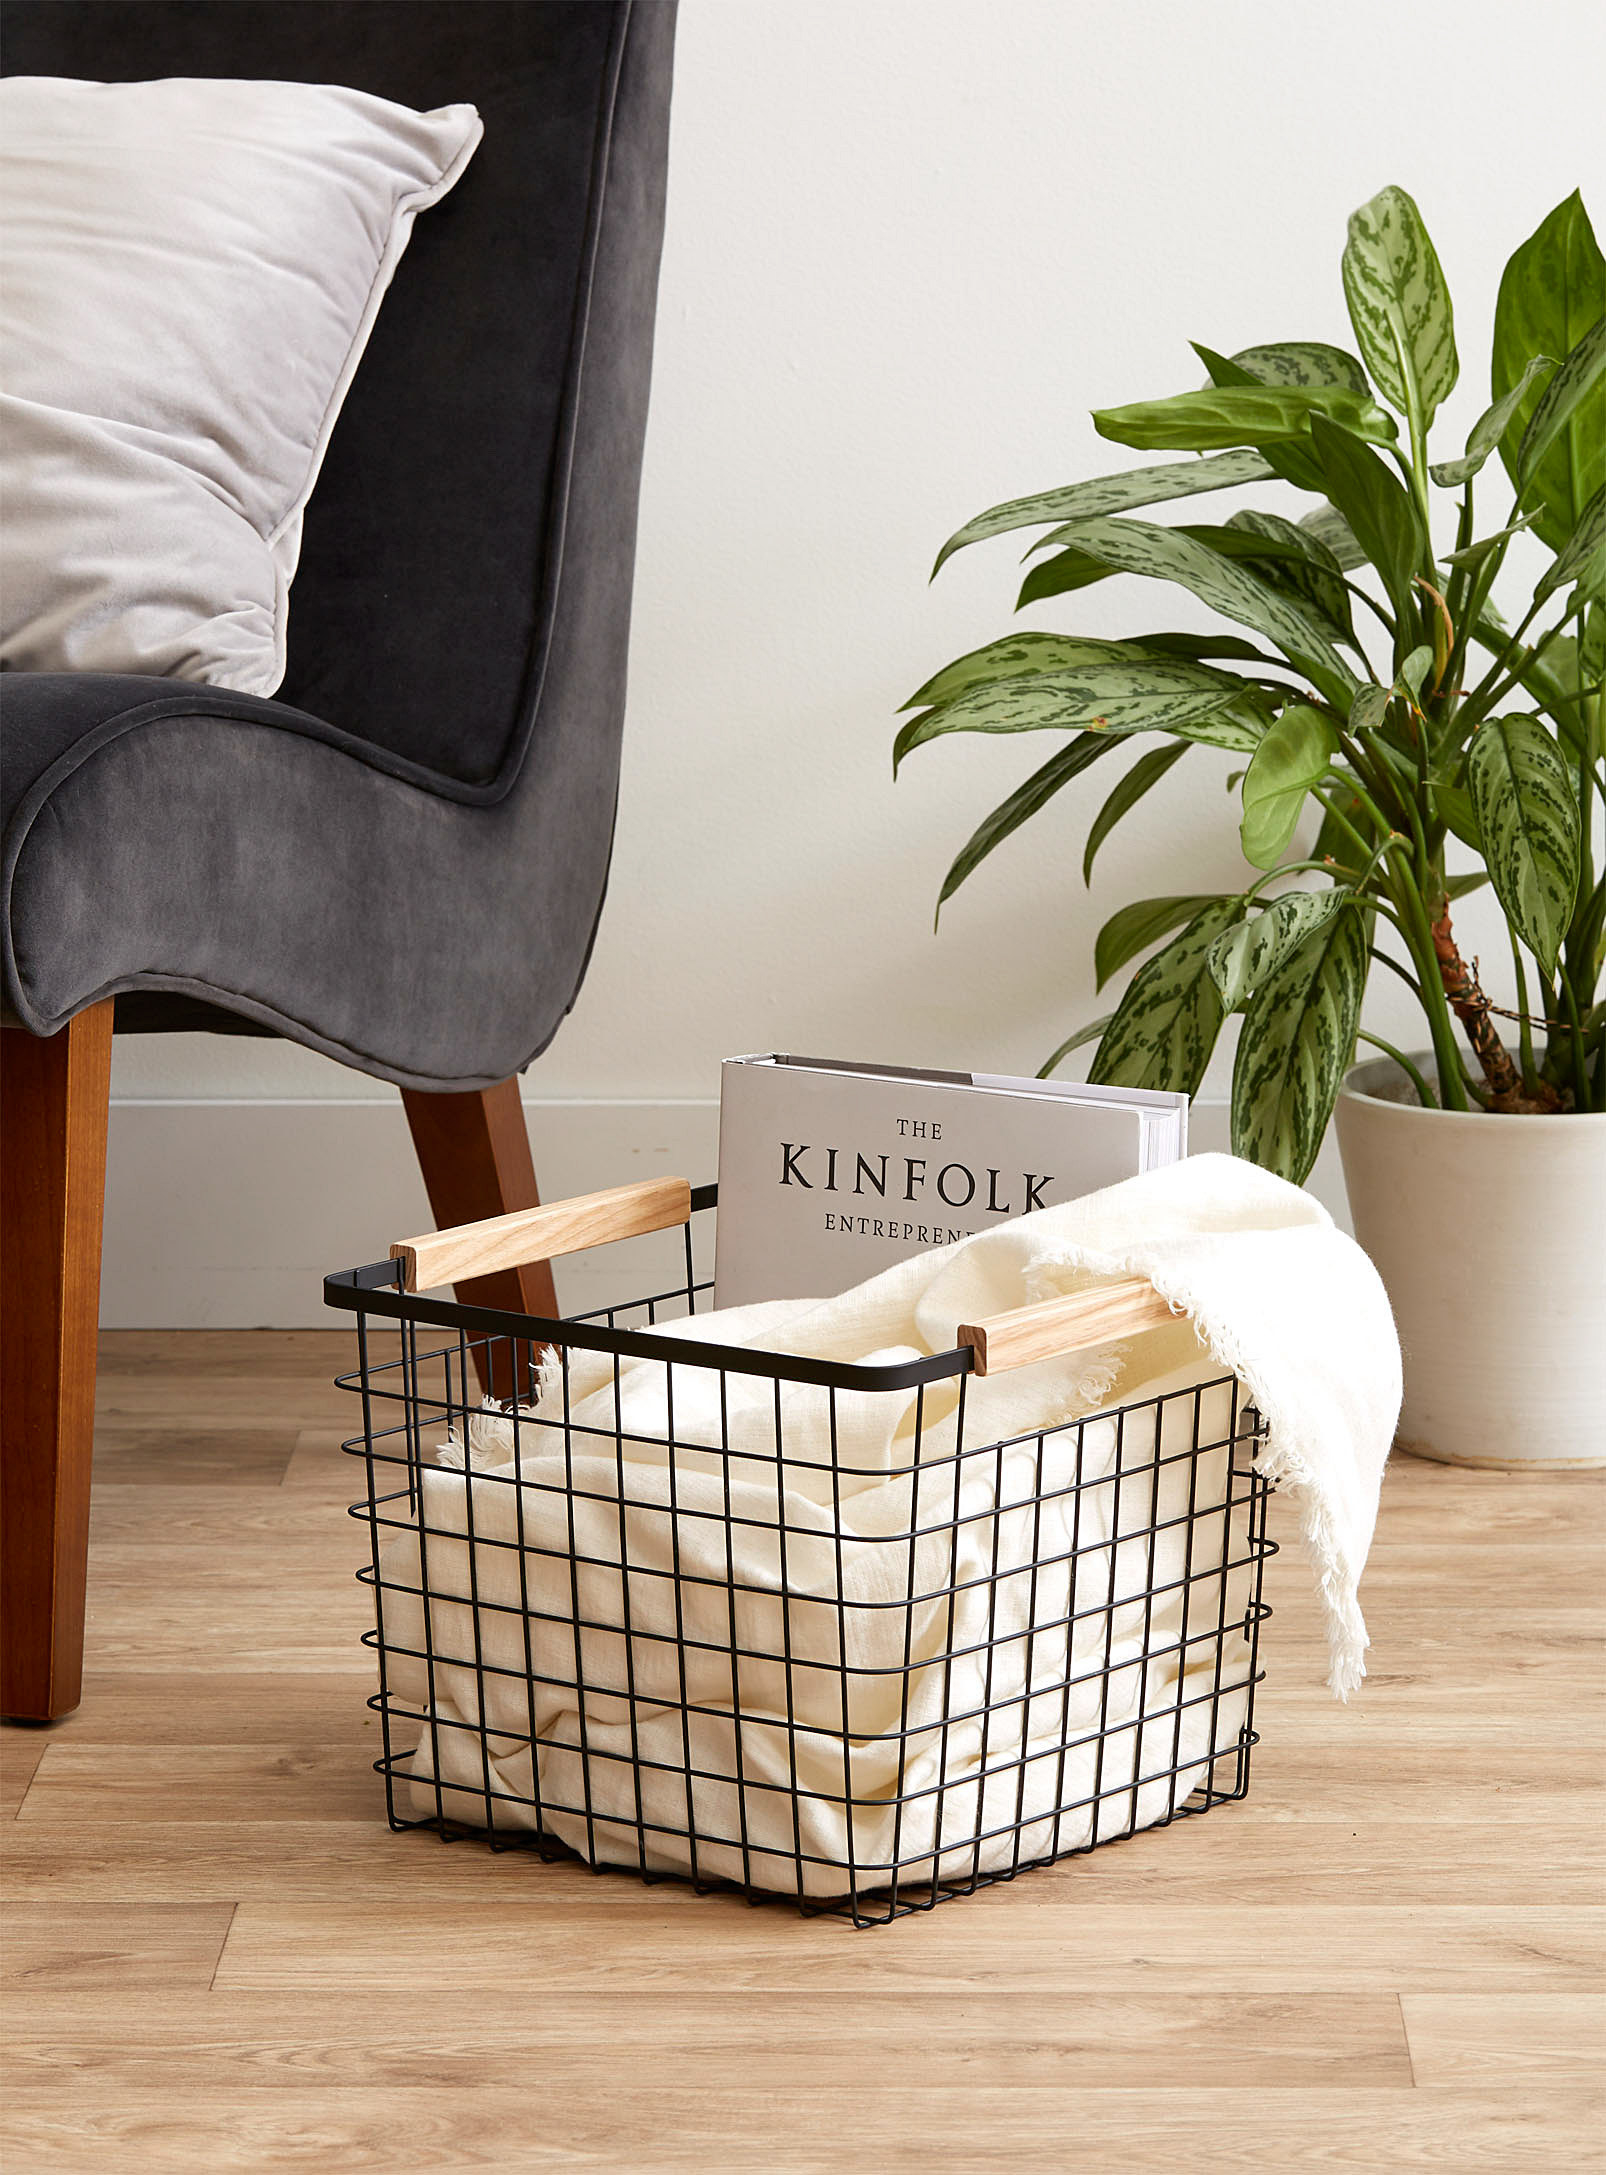 A wire basket on a wooden floor with a large book and a blanket inside